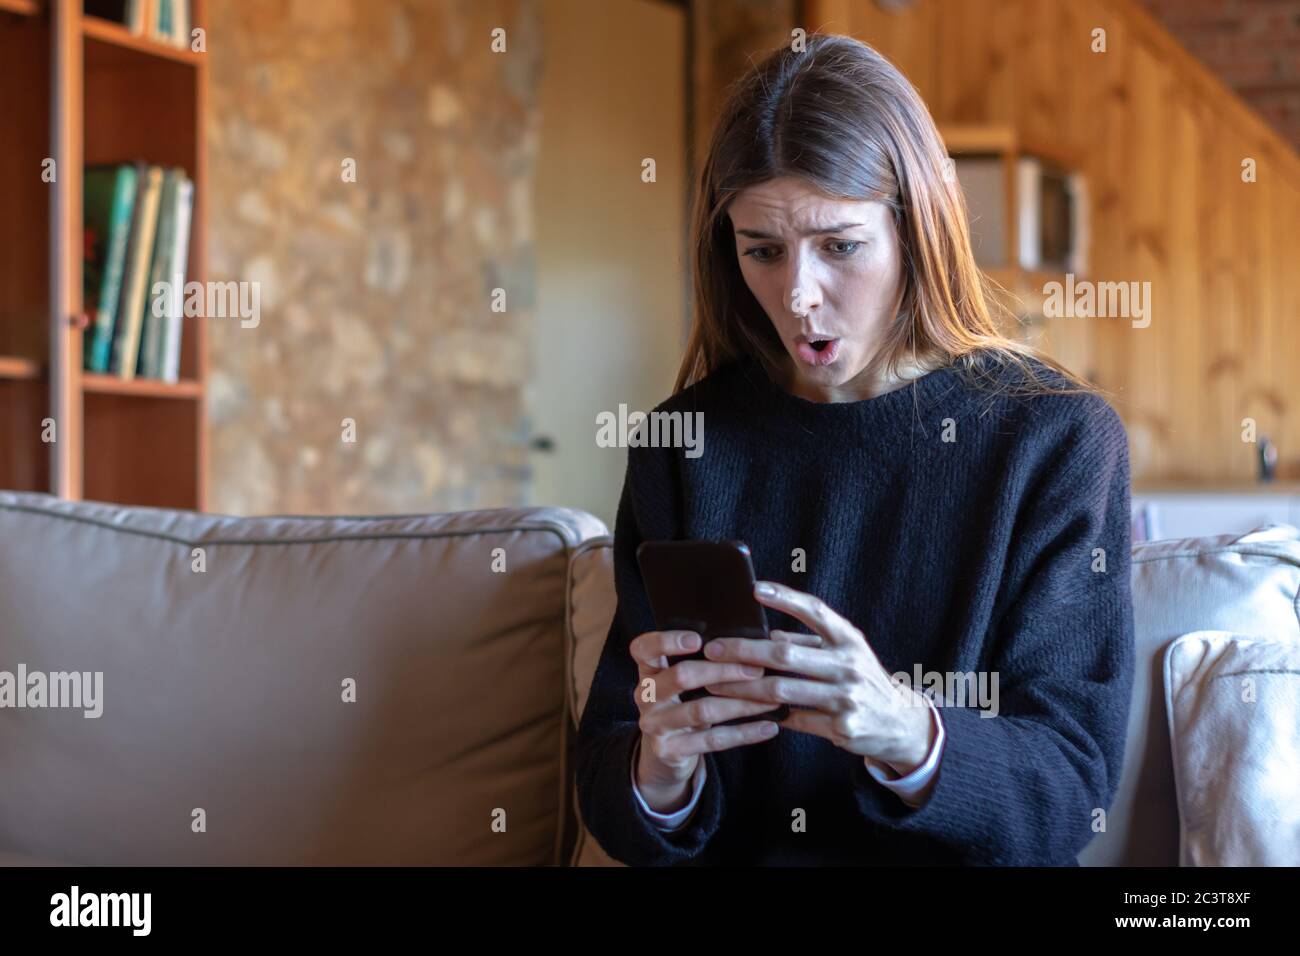 Shocked pretty young brunette woman typing on the smartphone sitting on the sofa at home wearing black sweater Stock Photo